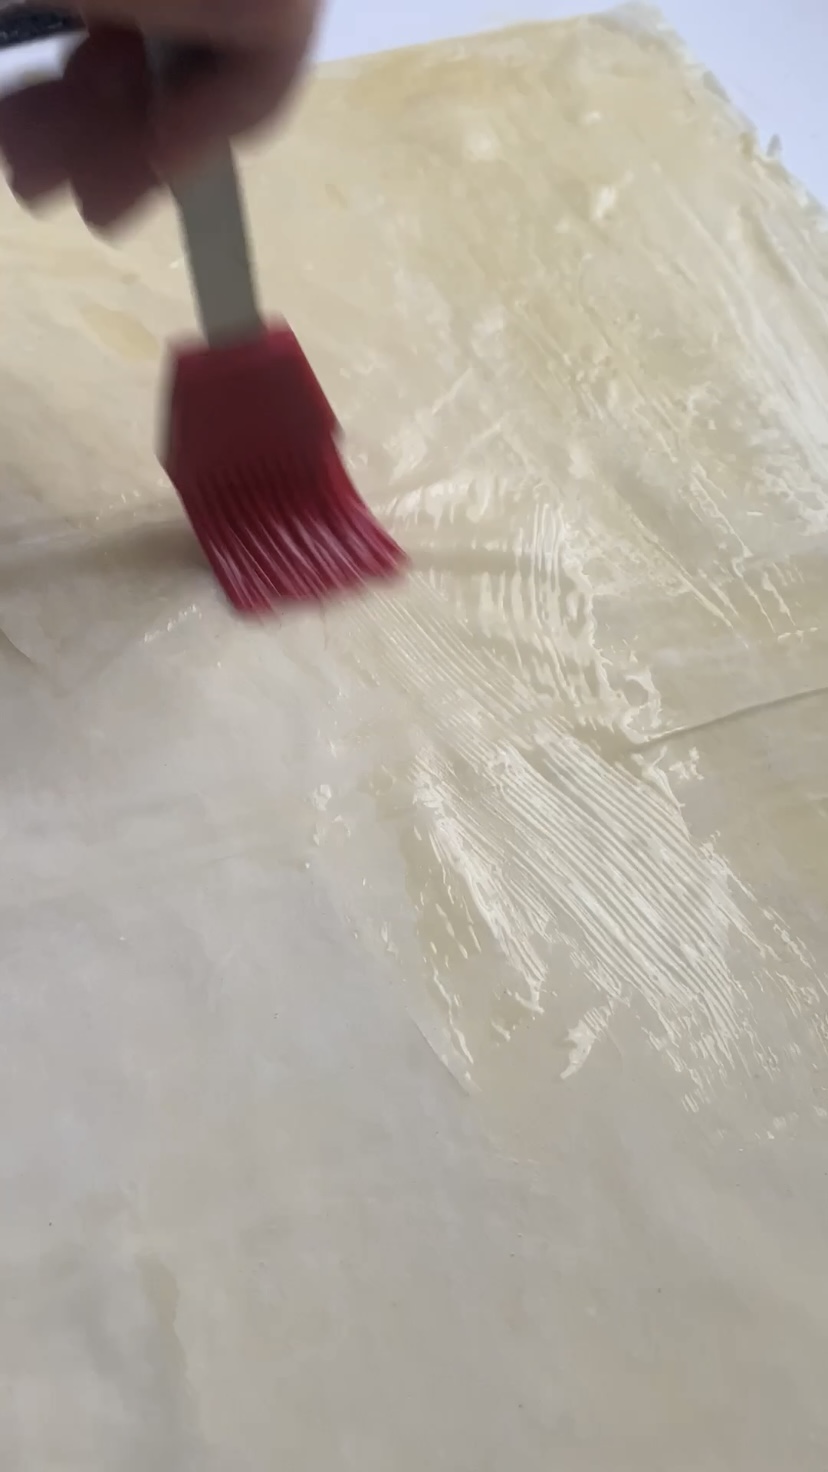 Buttering the phyllo with a pastry brush.